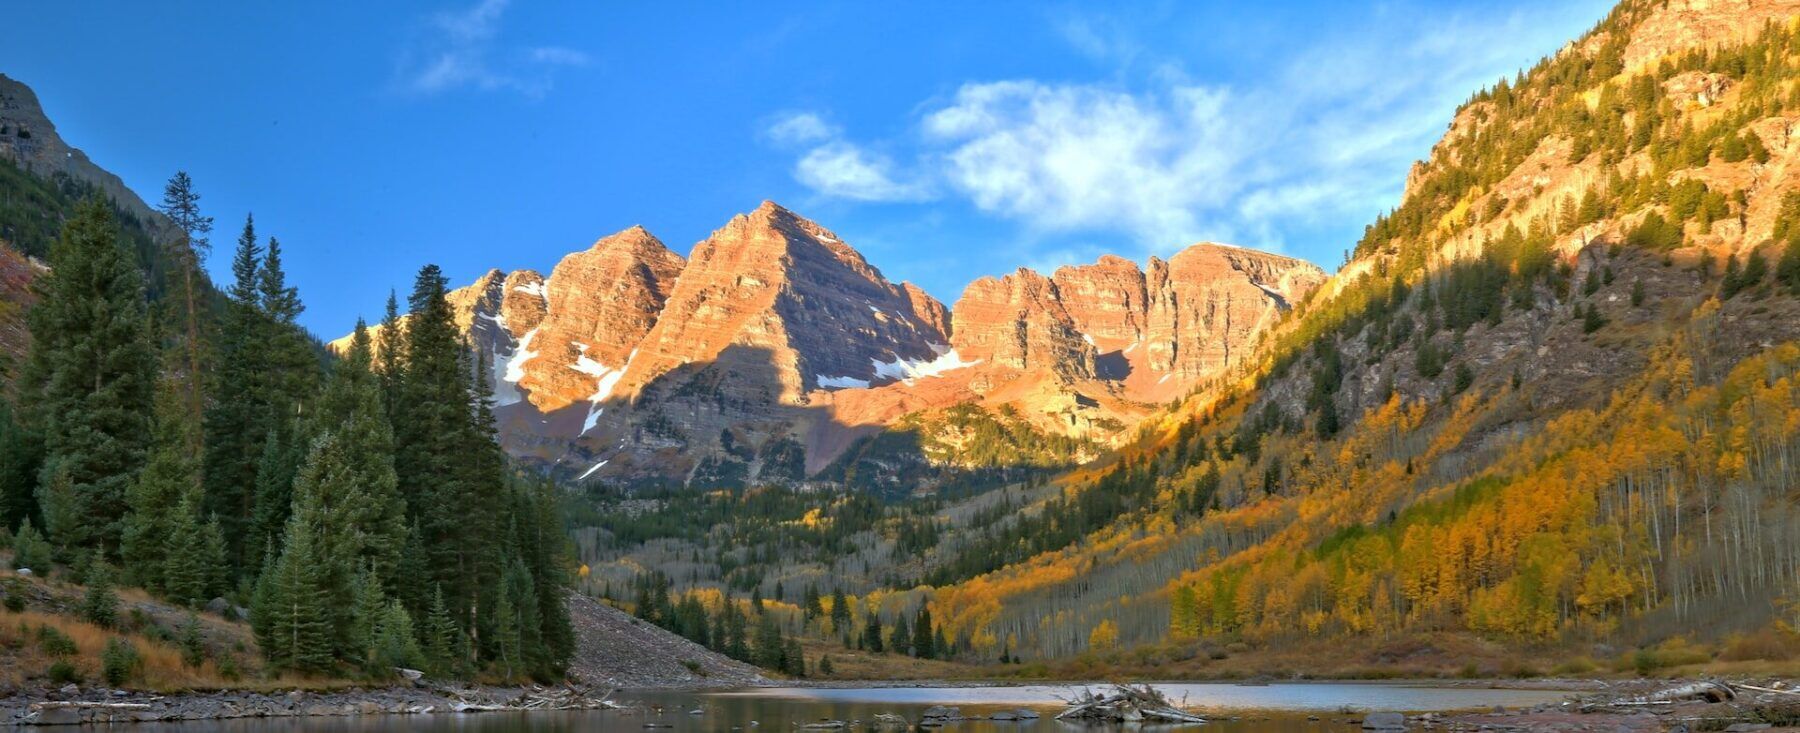 The Breathtaker  Colorado Snowmass Attractions & Activities